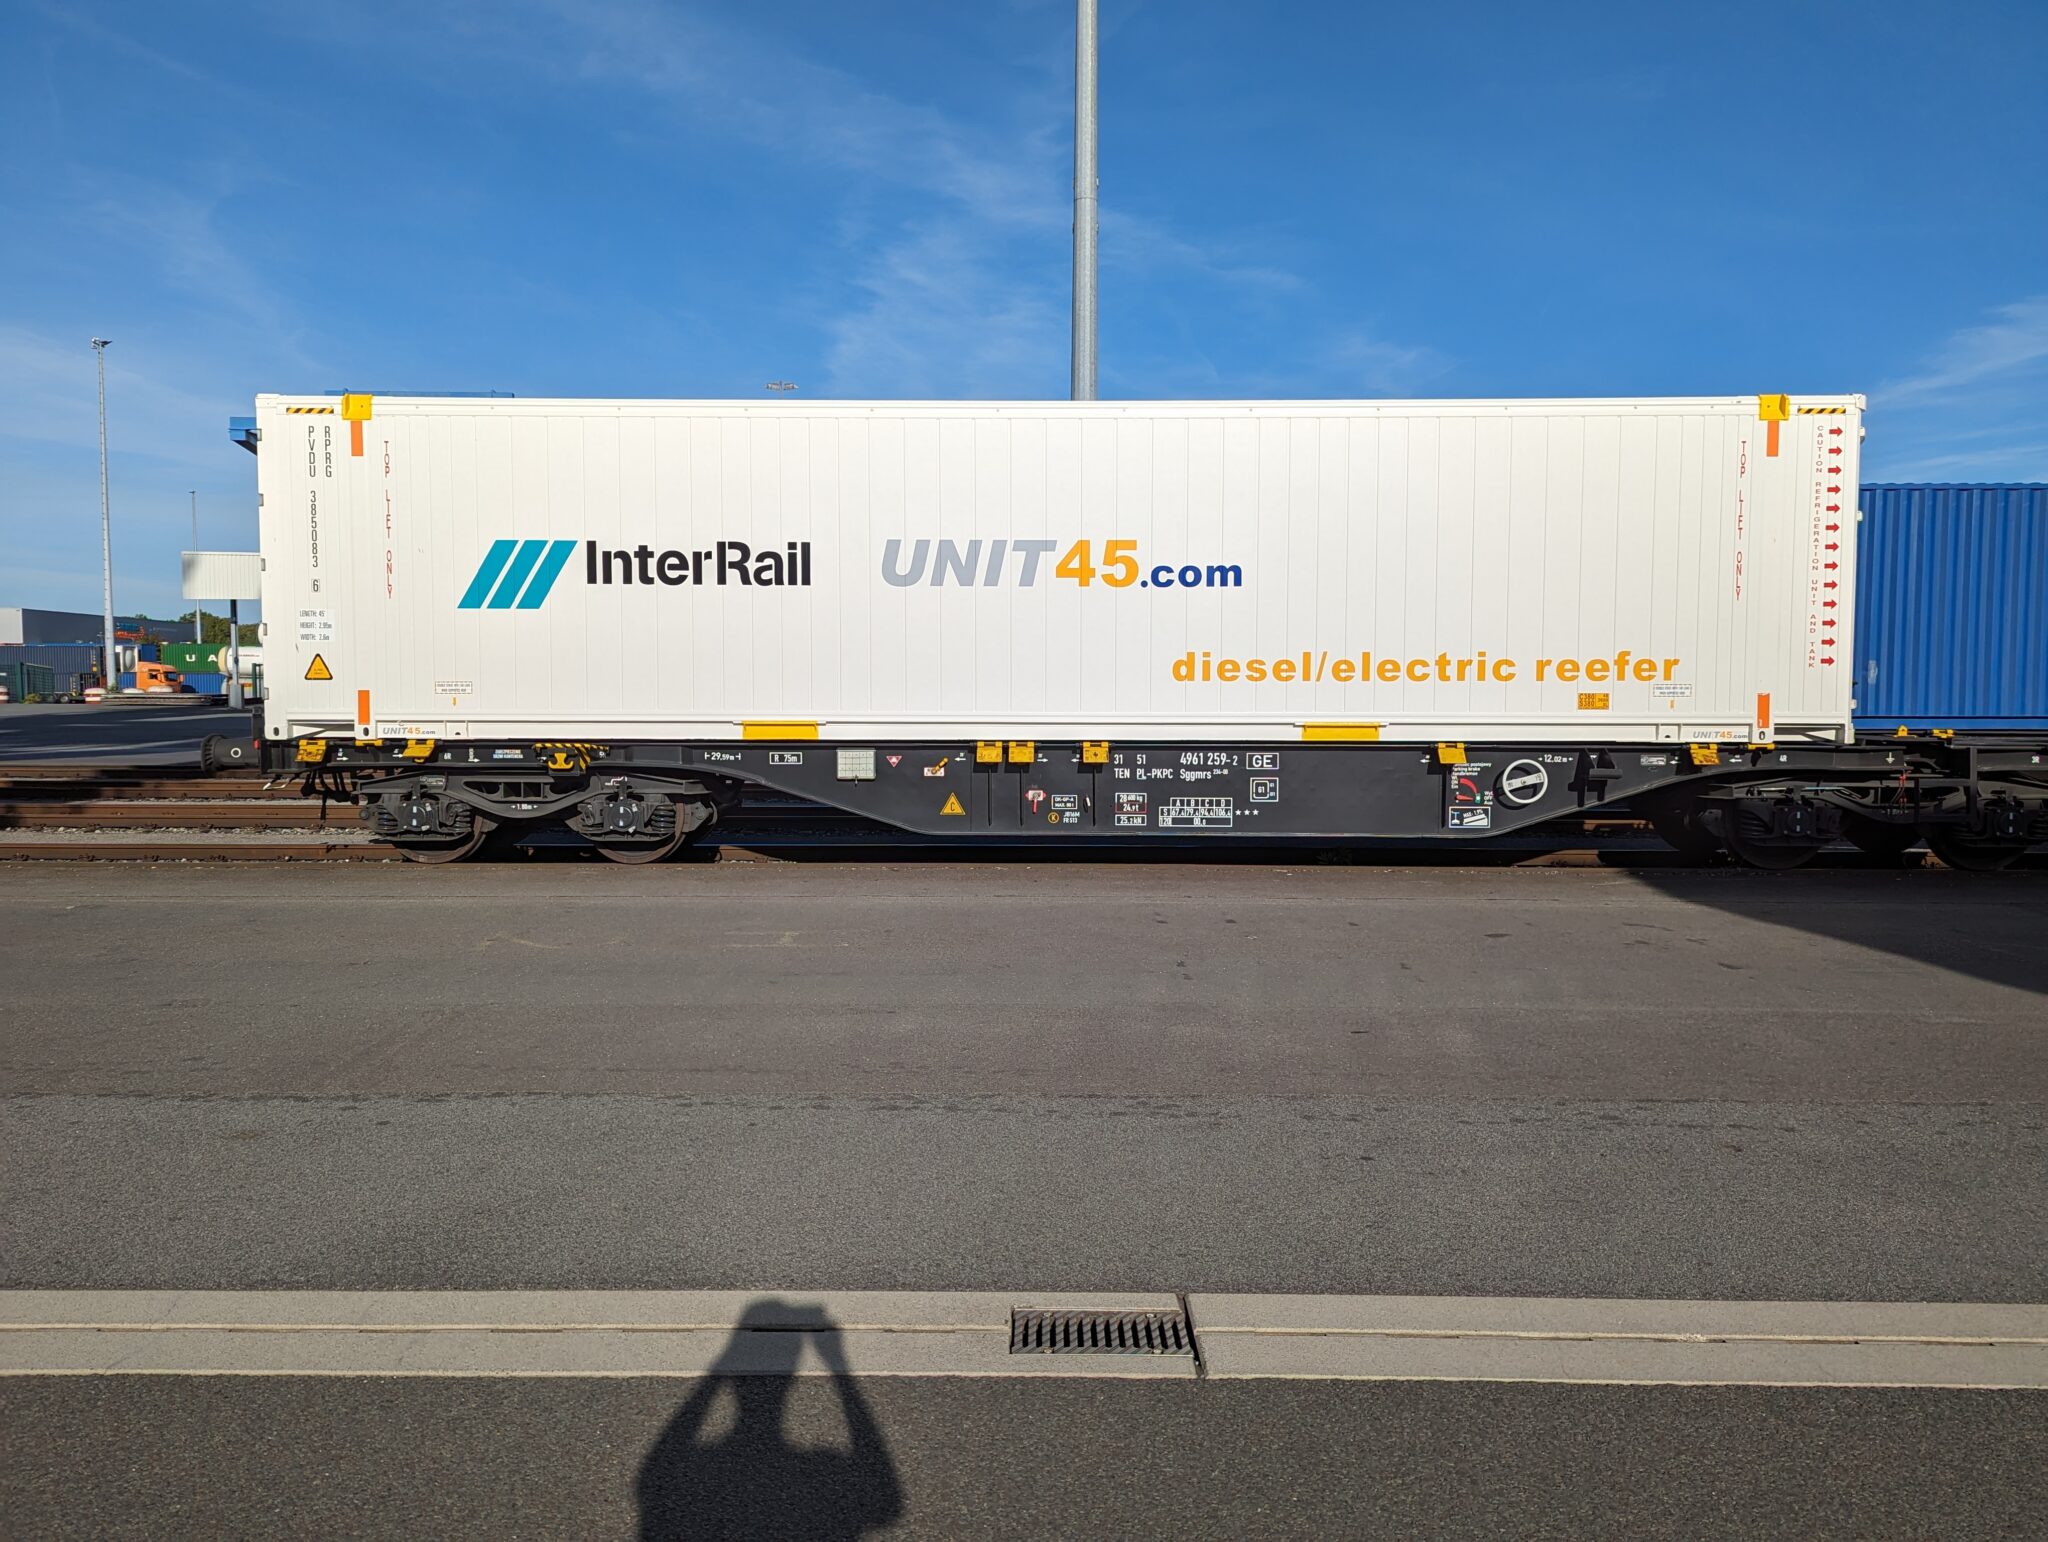 New Service: InterRail offers temperature-controlled rail transports between Europe and Asia